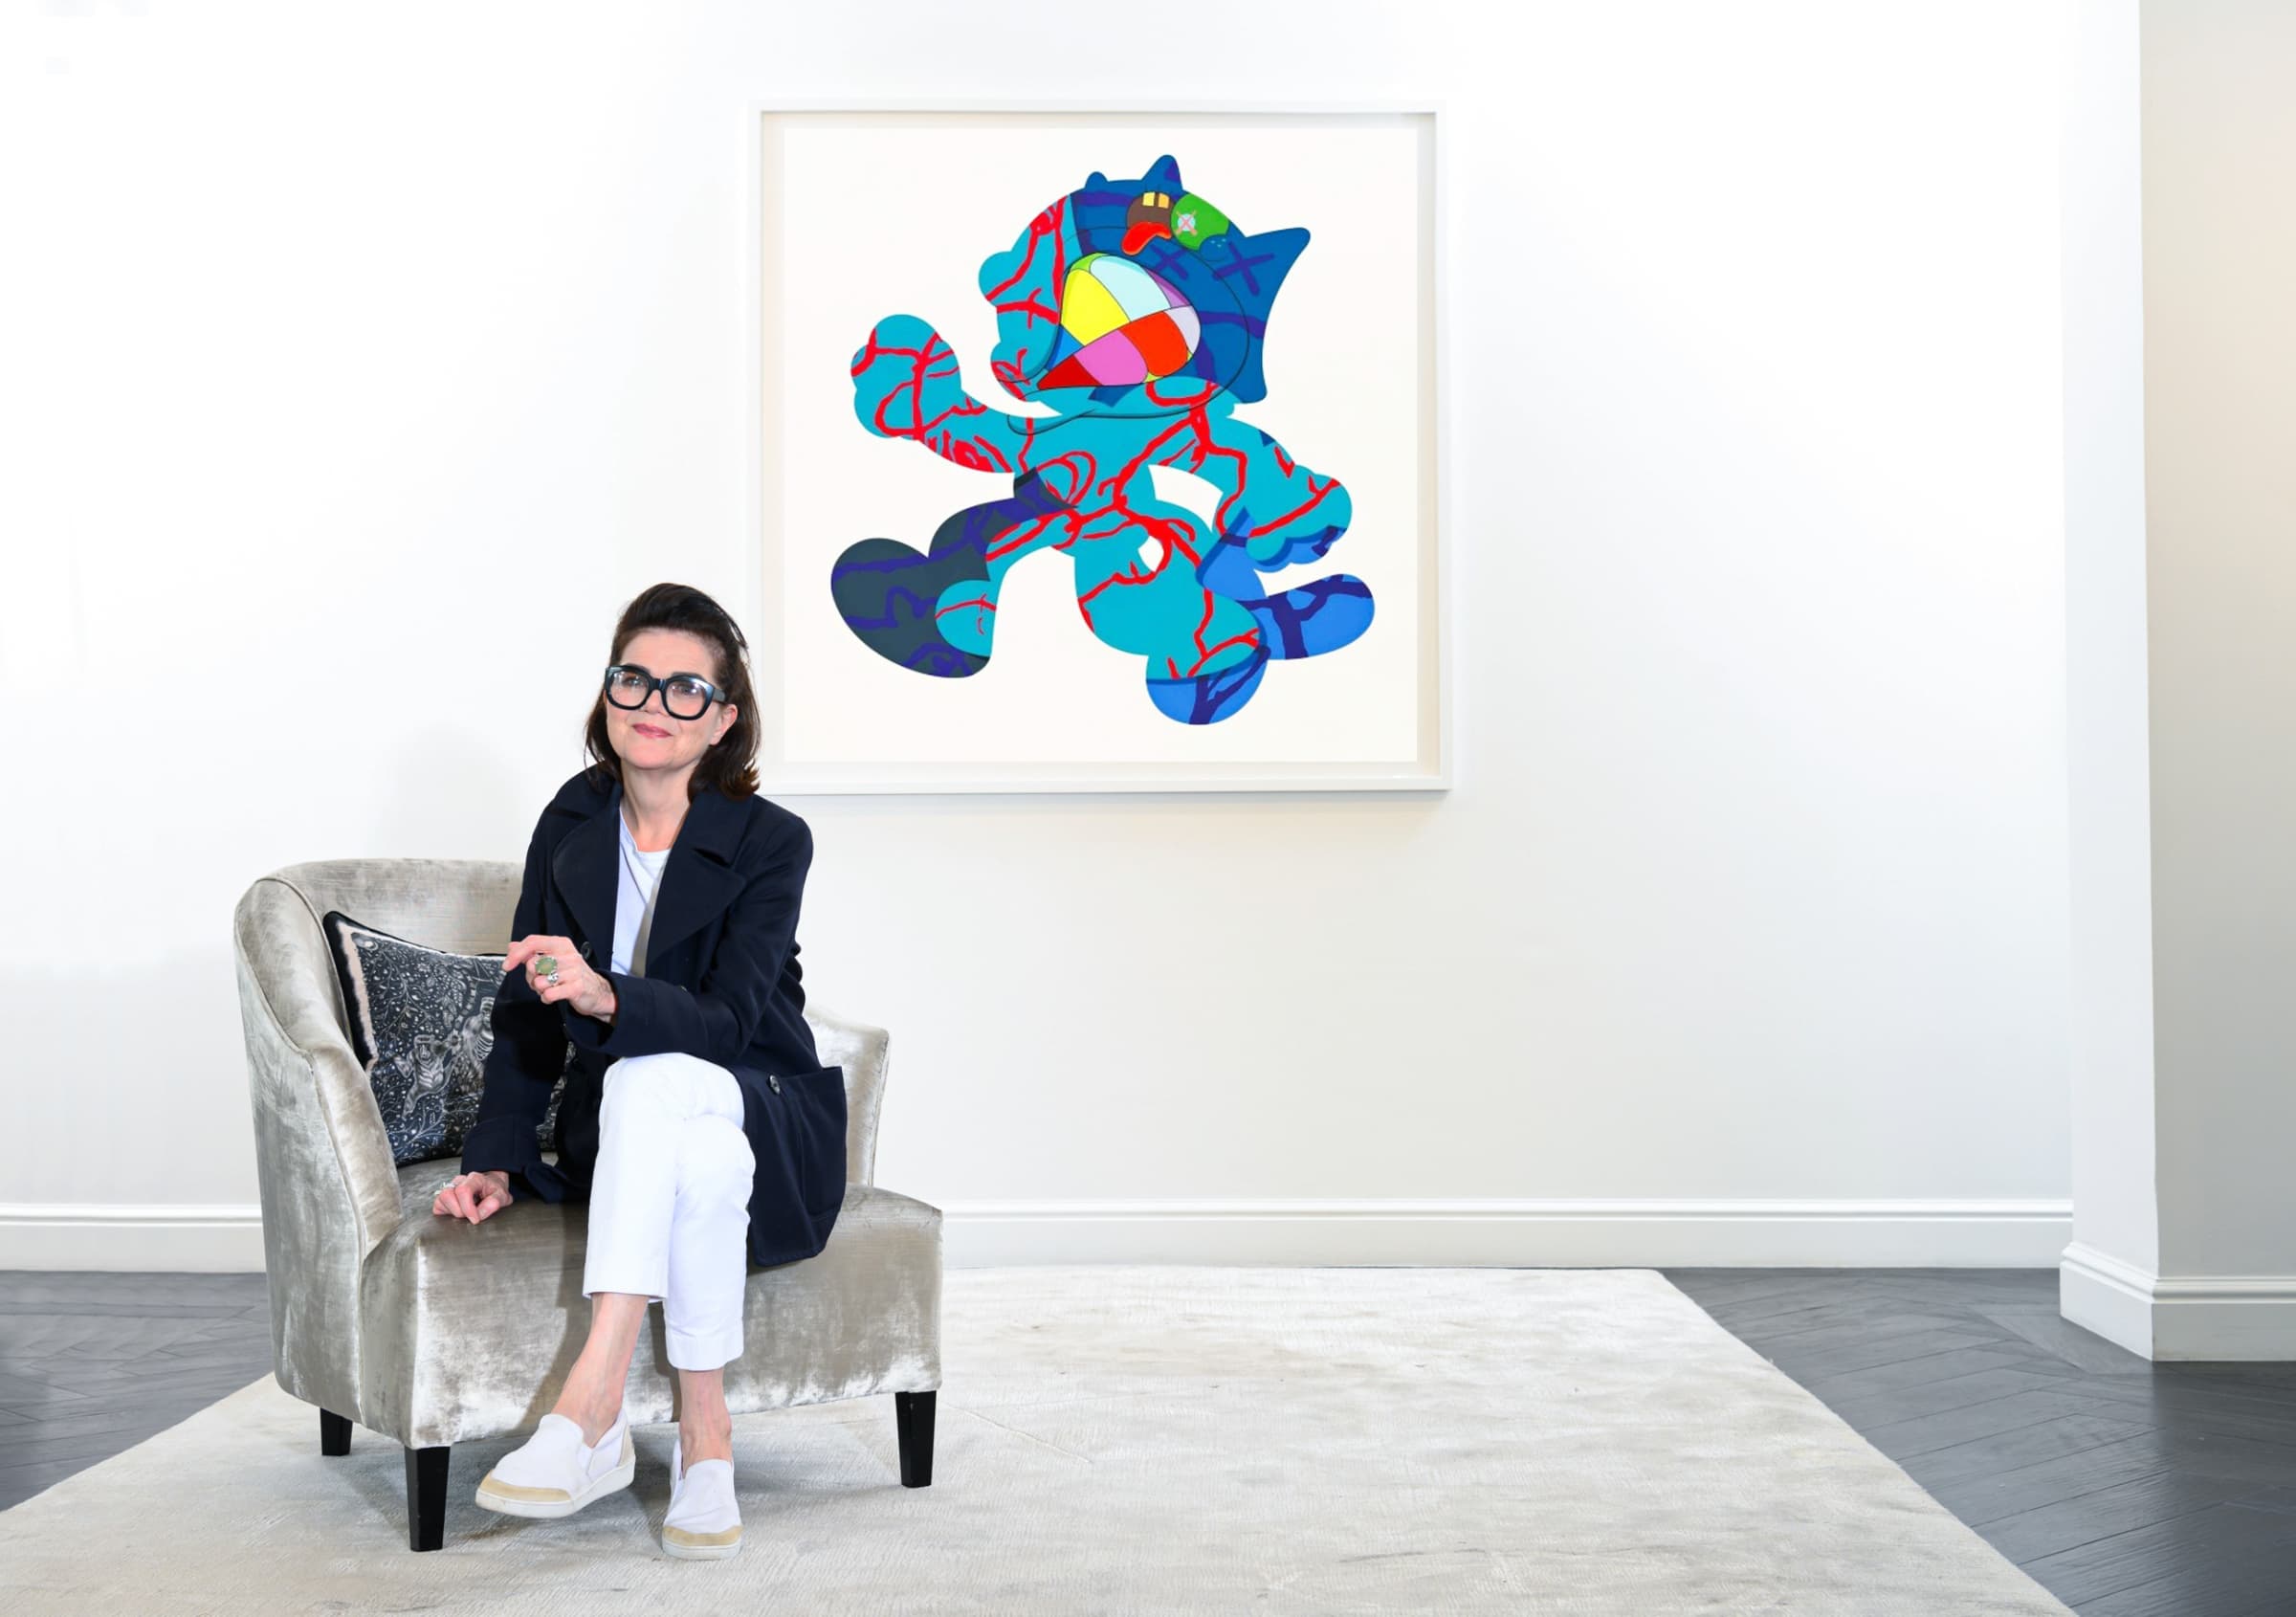 Maddox Artistic Director, Maeve Doyle on Why 2021 Is The Year of KAWS , We speak to Maeve Doyle about...